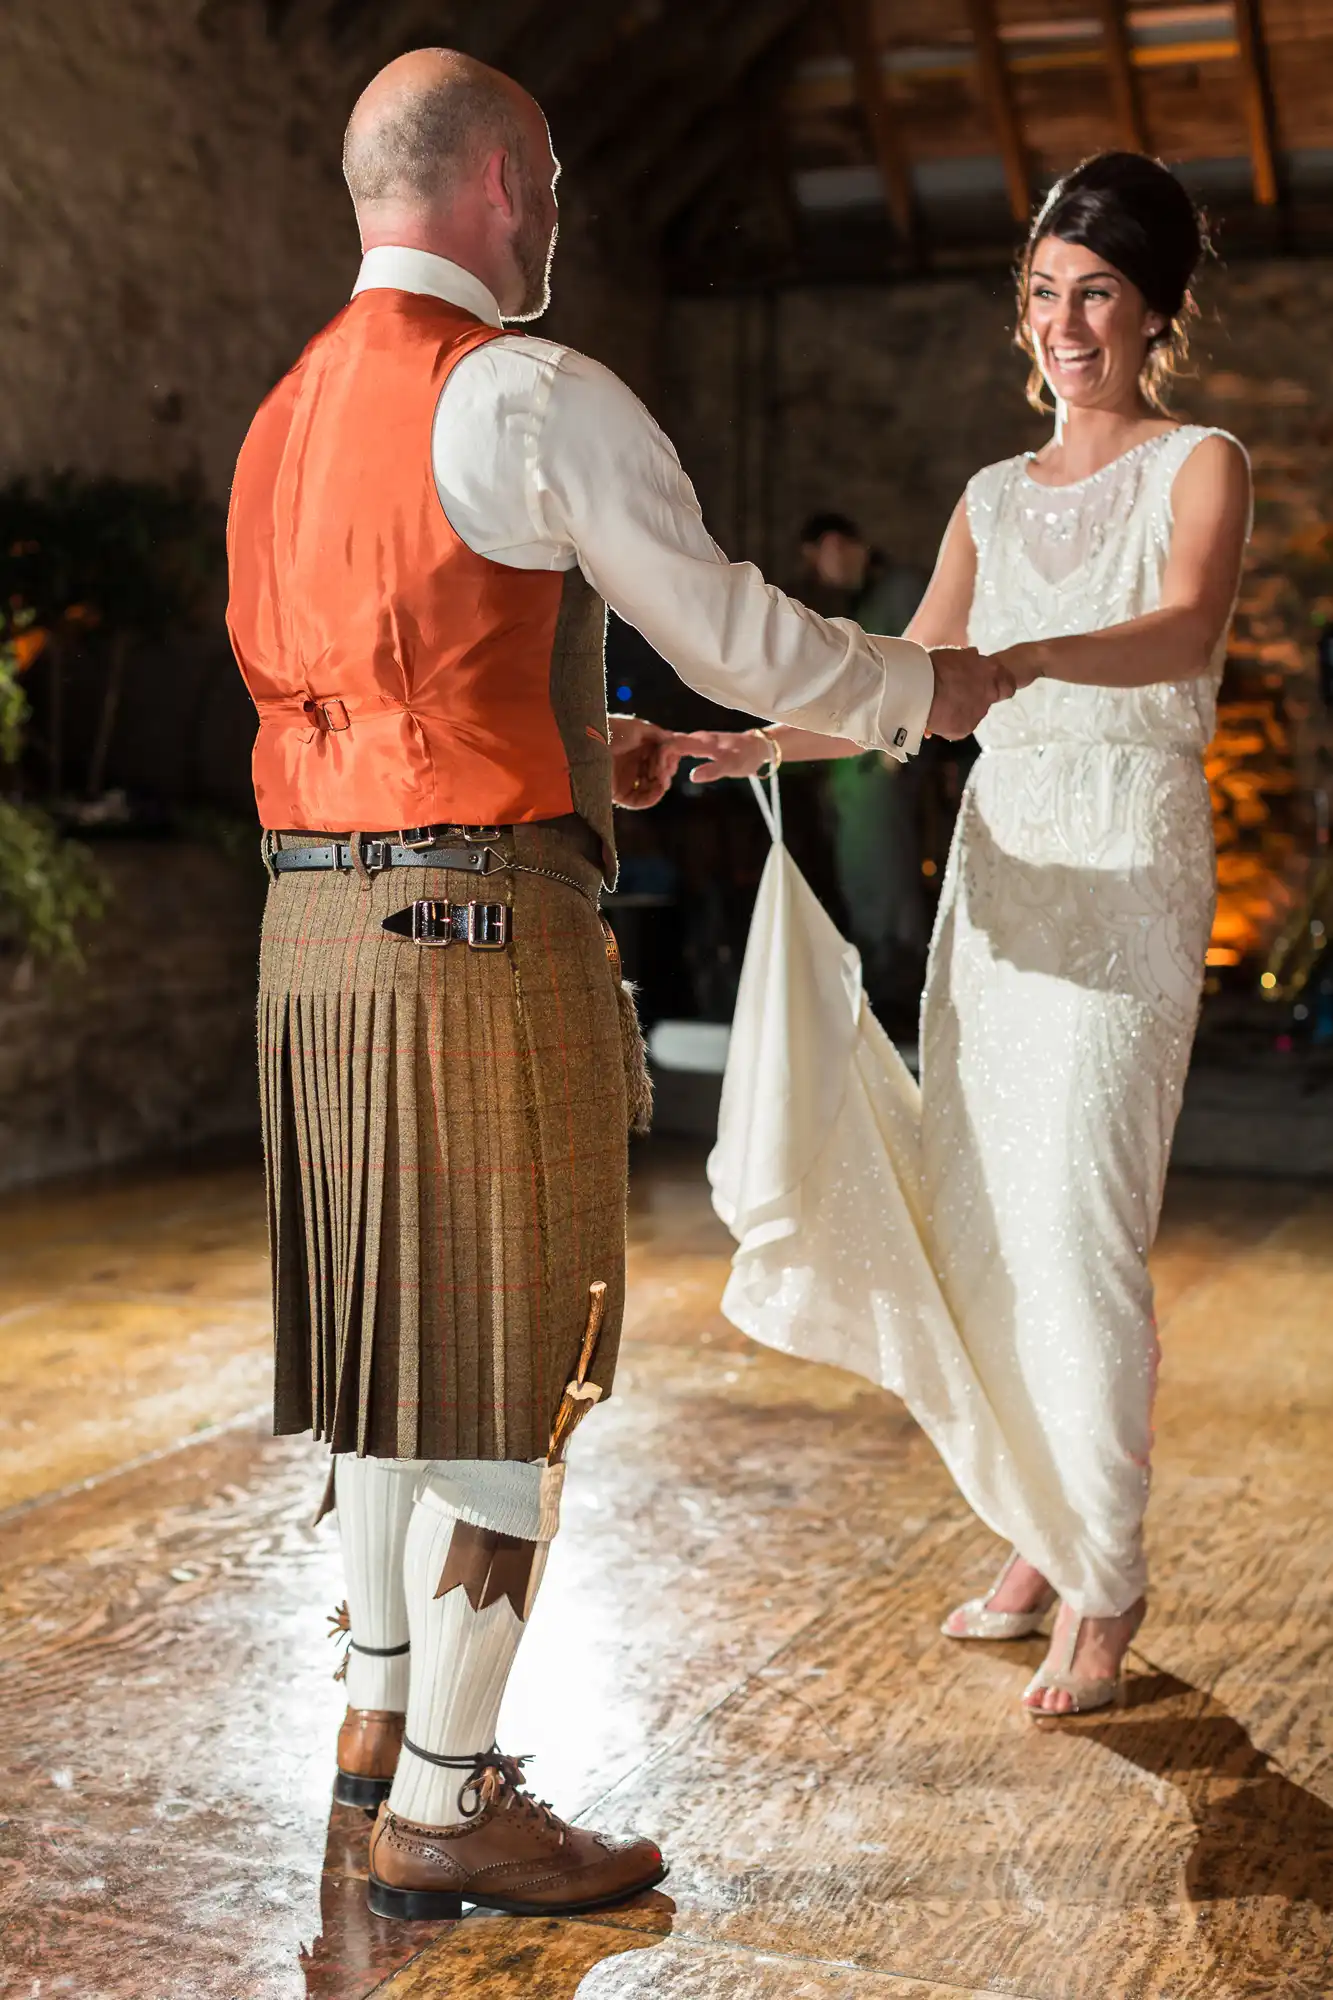 A bride and groom in traditional scottish attire dance joyfully at their wedding, the groom wearing a kilt and the bride in a white dress.